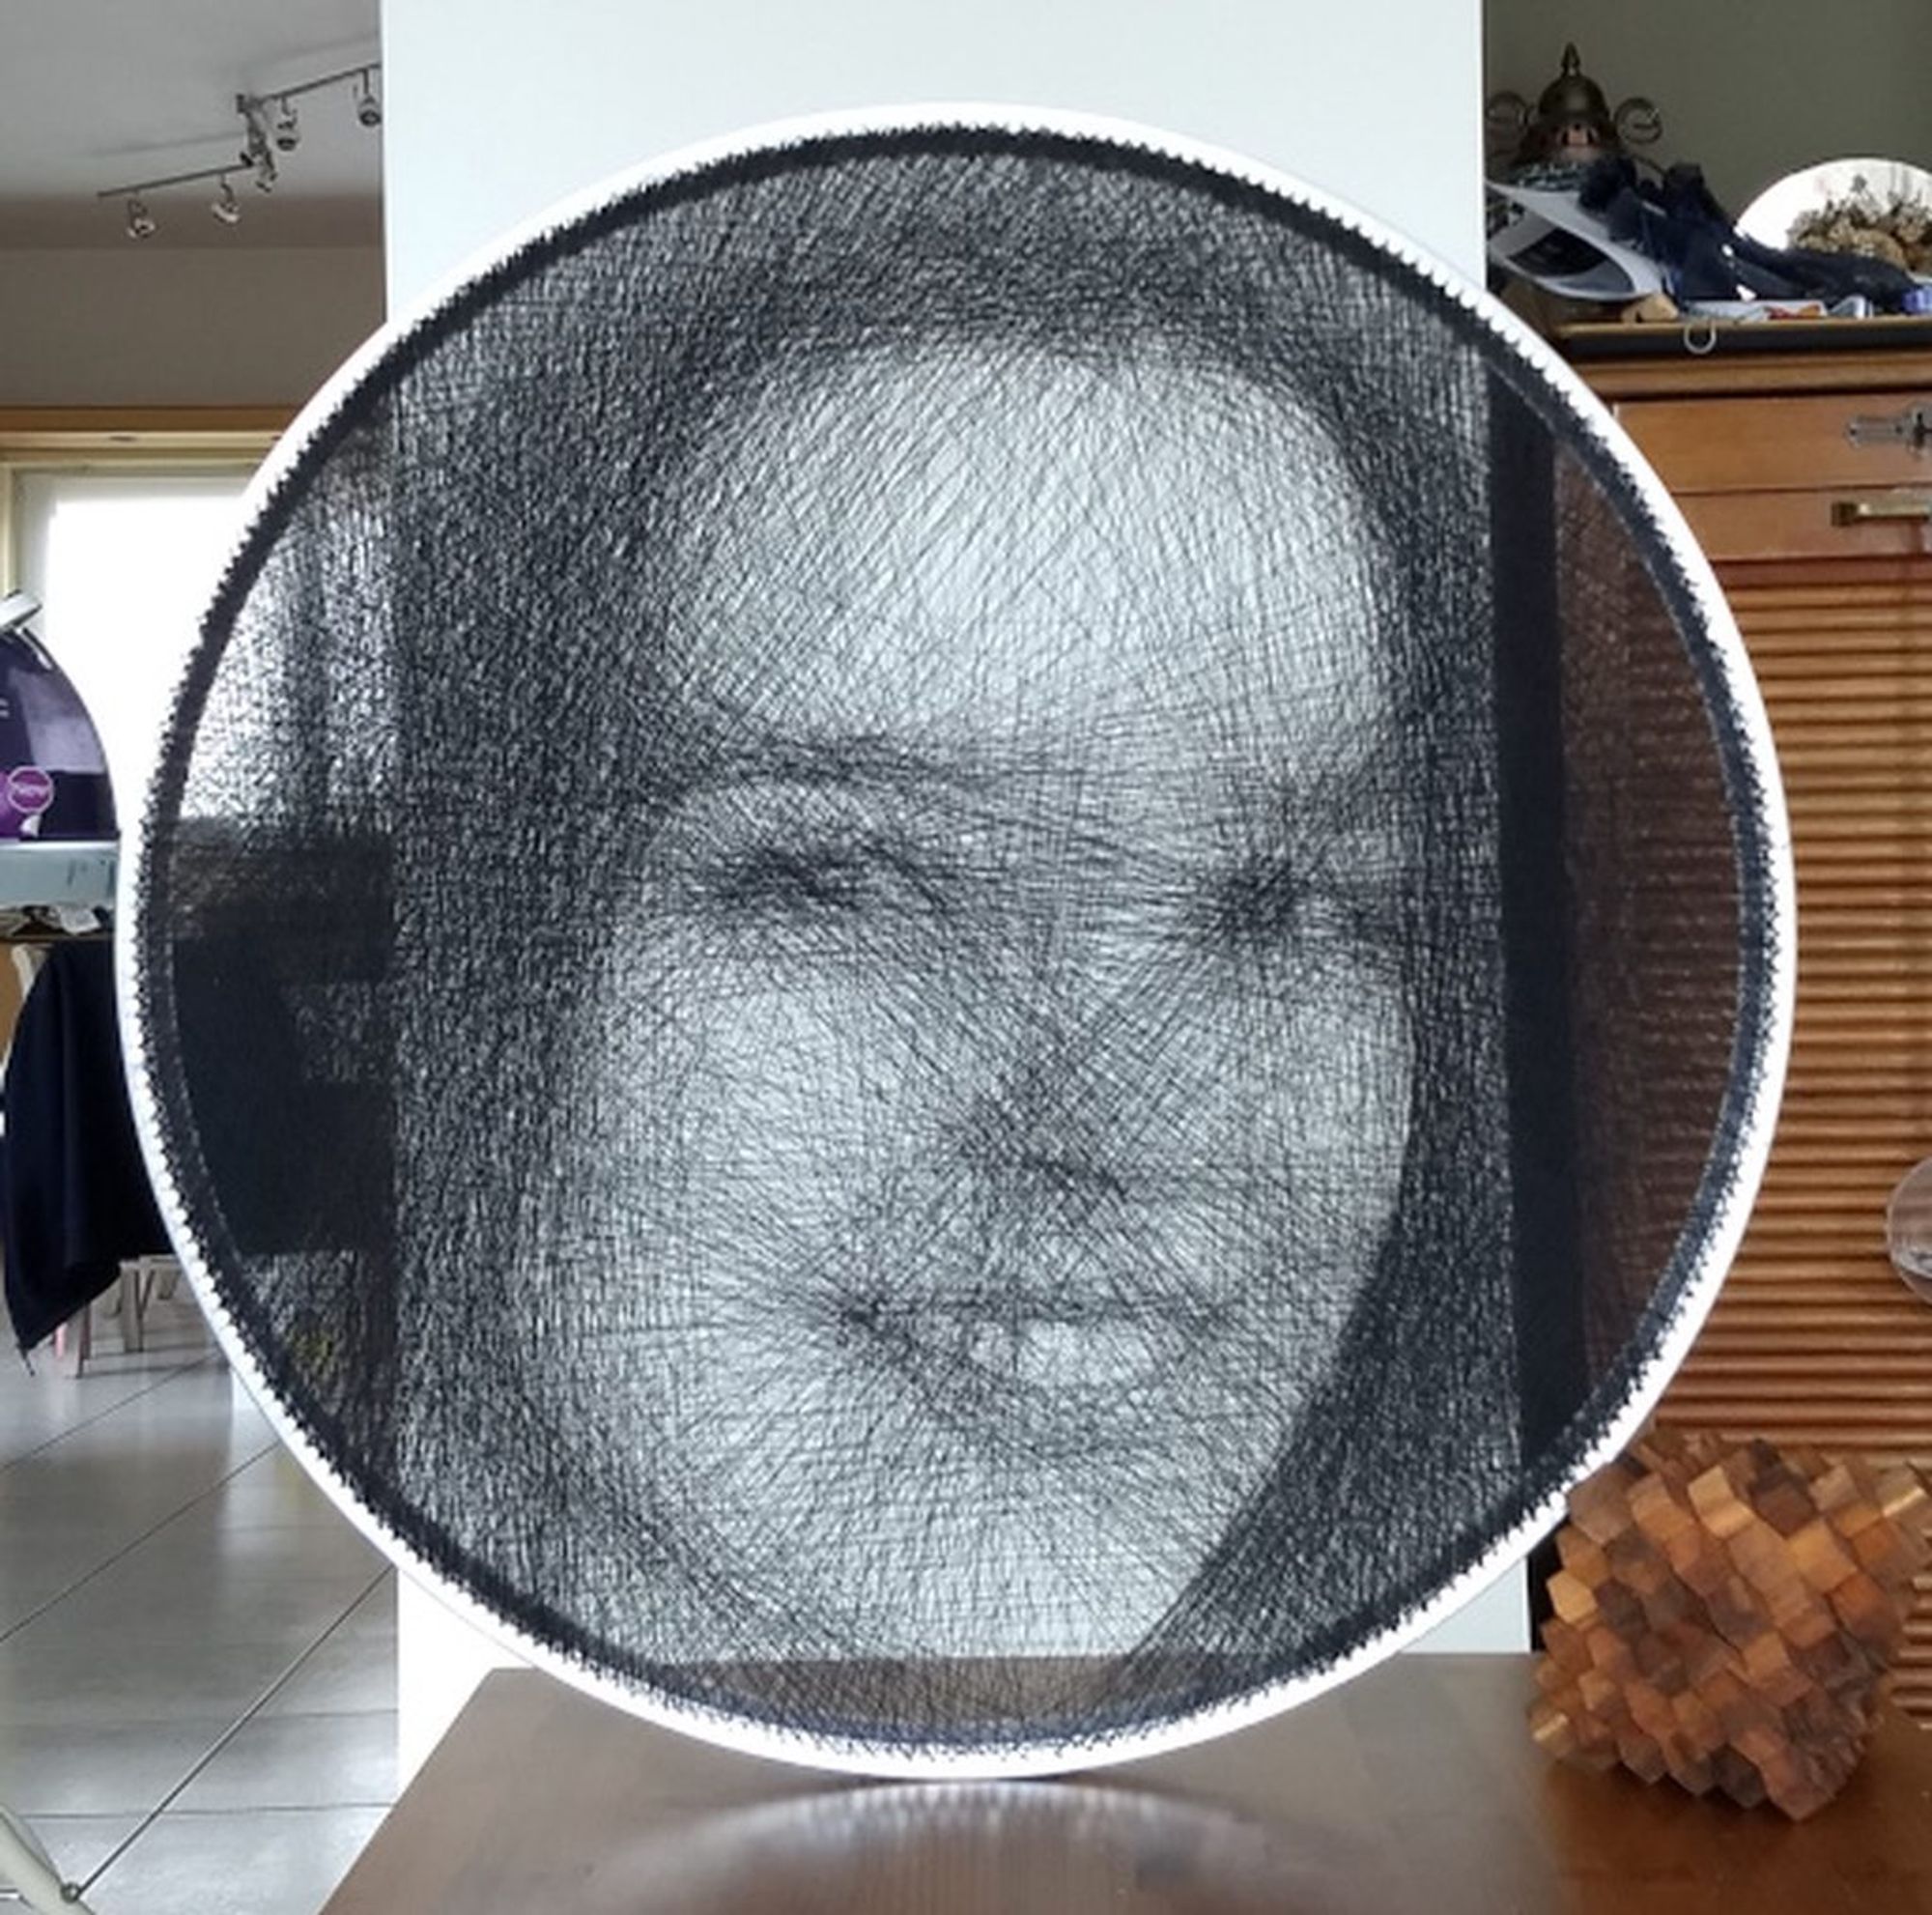 I made a string art portrait out of a continuous 2 km long thread